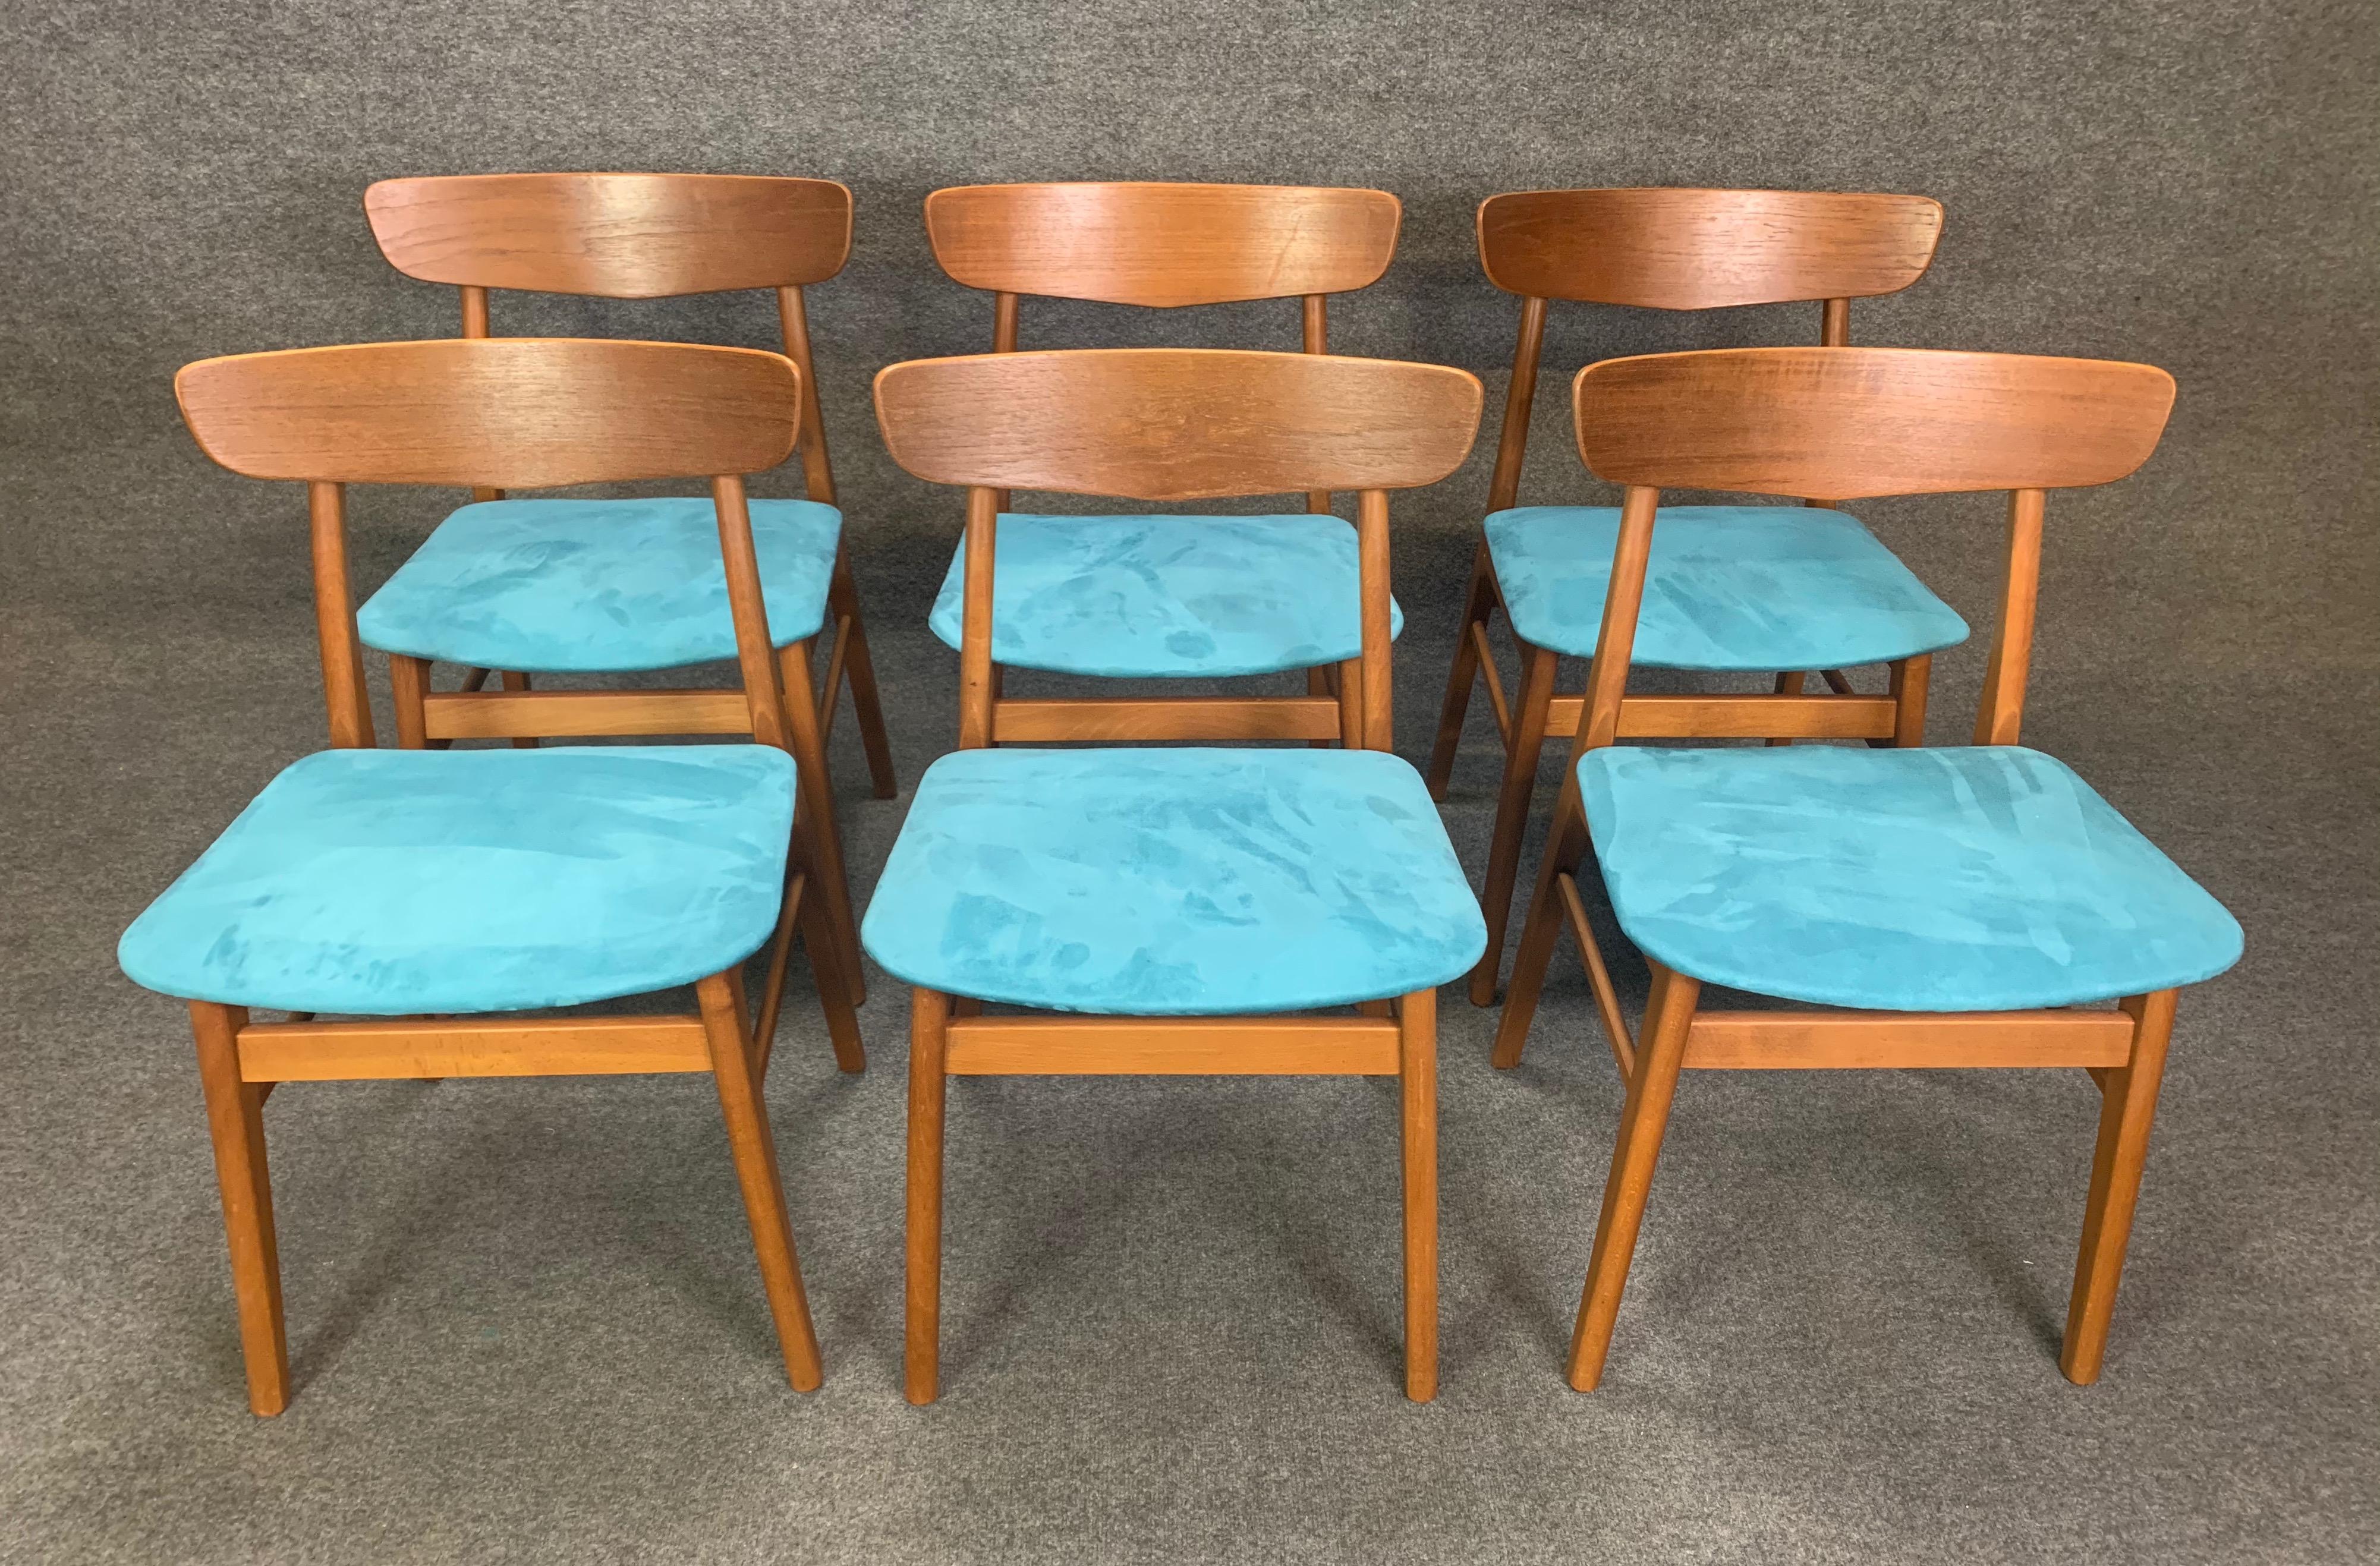 Mid-20th Century Set of Six Vintage Midcentury Danish Modern Teak Dining Chairs by Findhahls For Sale